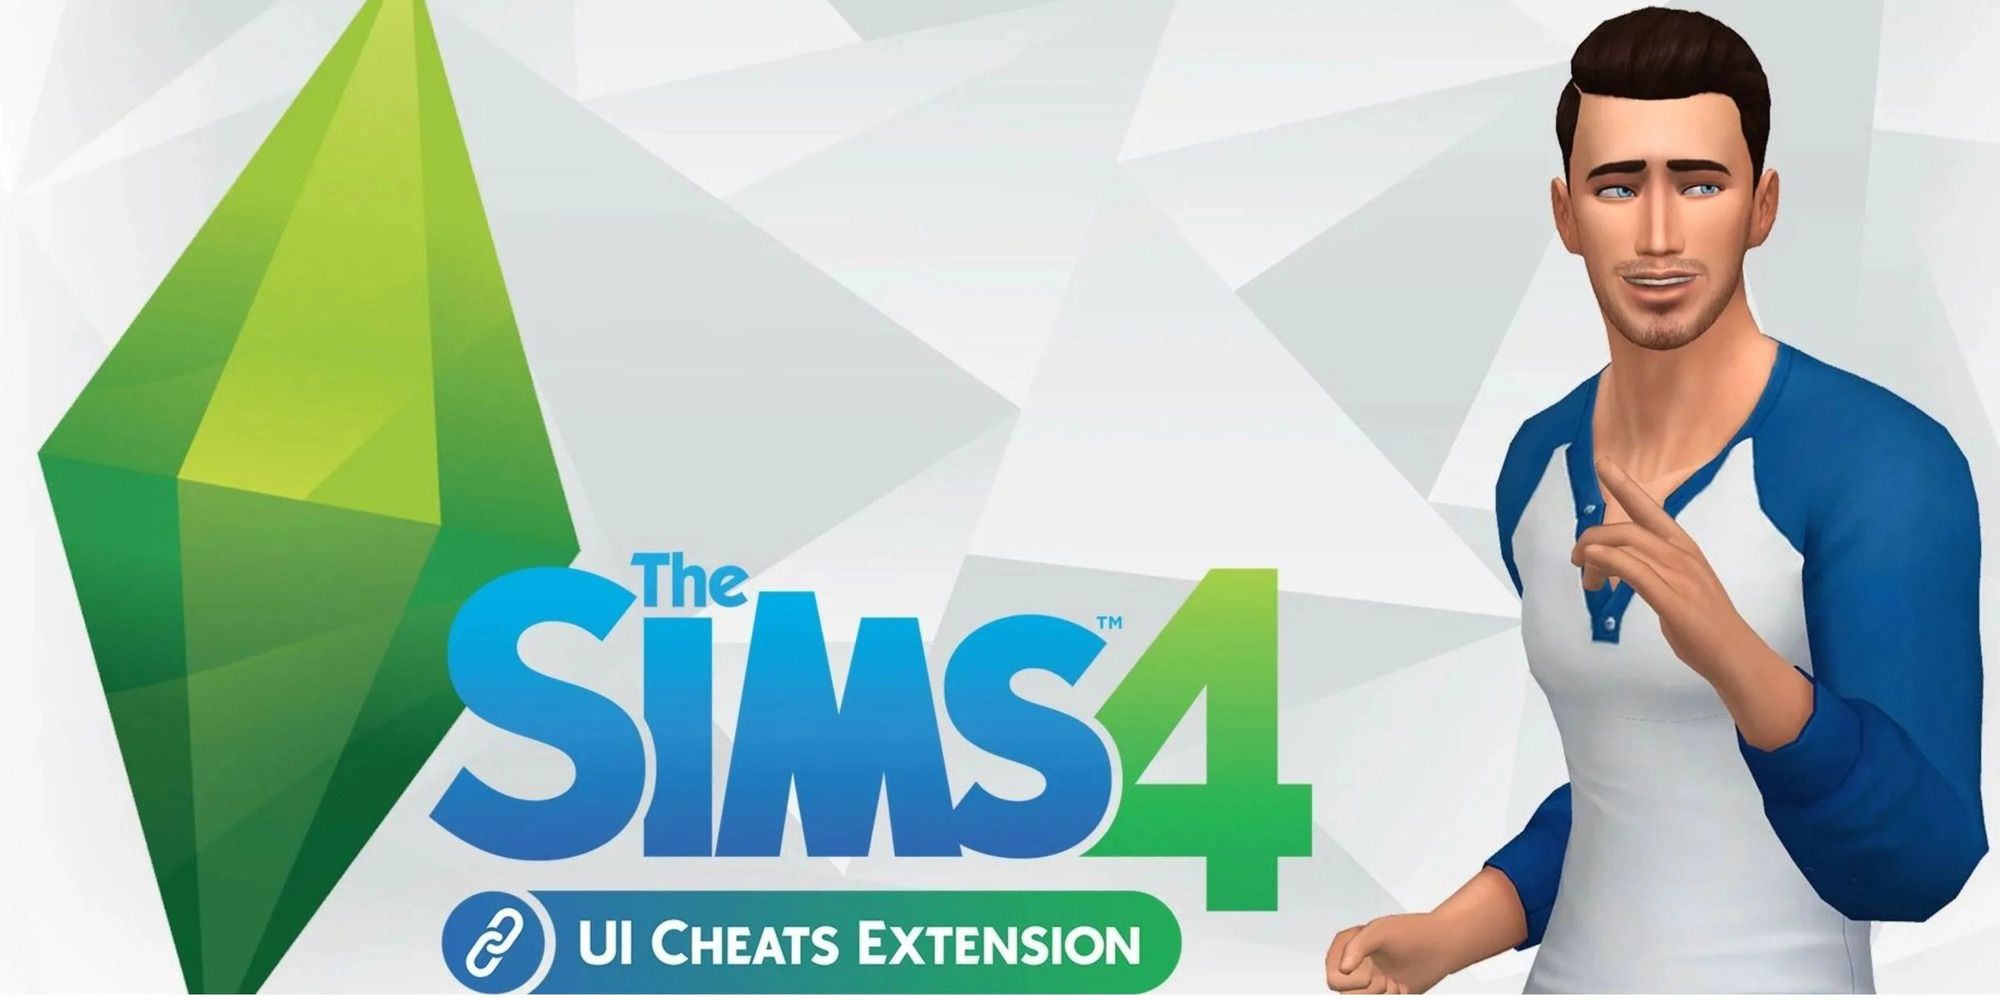 The art for Weerbesu's UI Cheats Extension mod; on the left, a plumbob sits off-center behind the Sims 4: UI Cheats Extension logo. On the right, Weerbesu's Simself poses